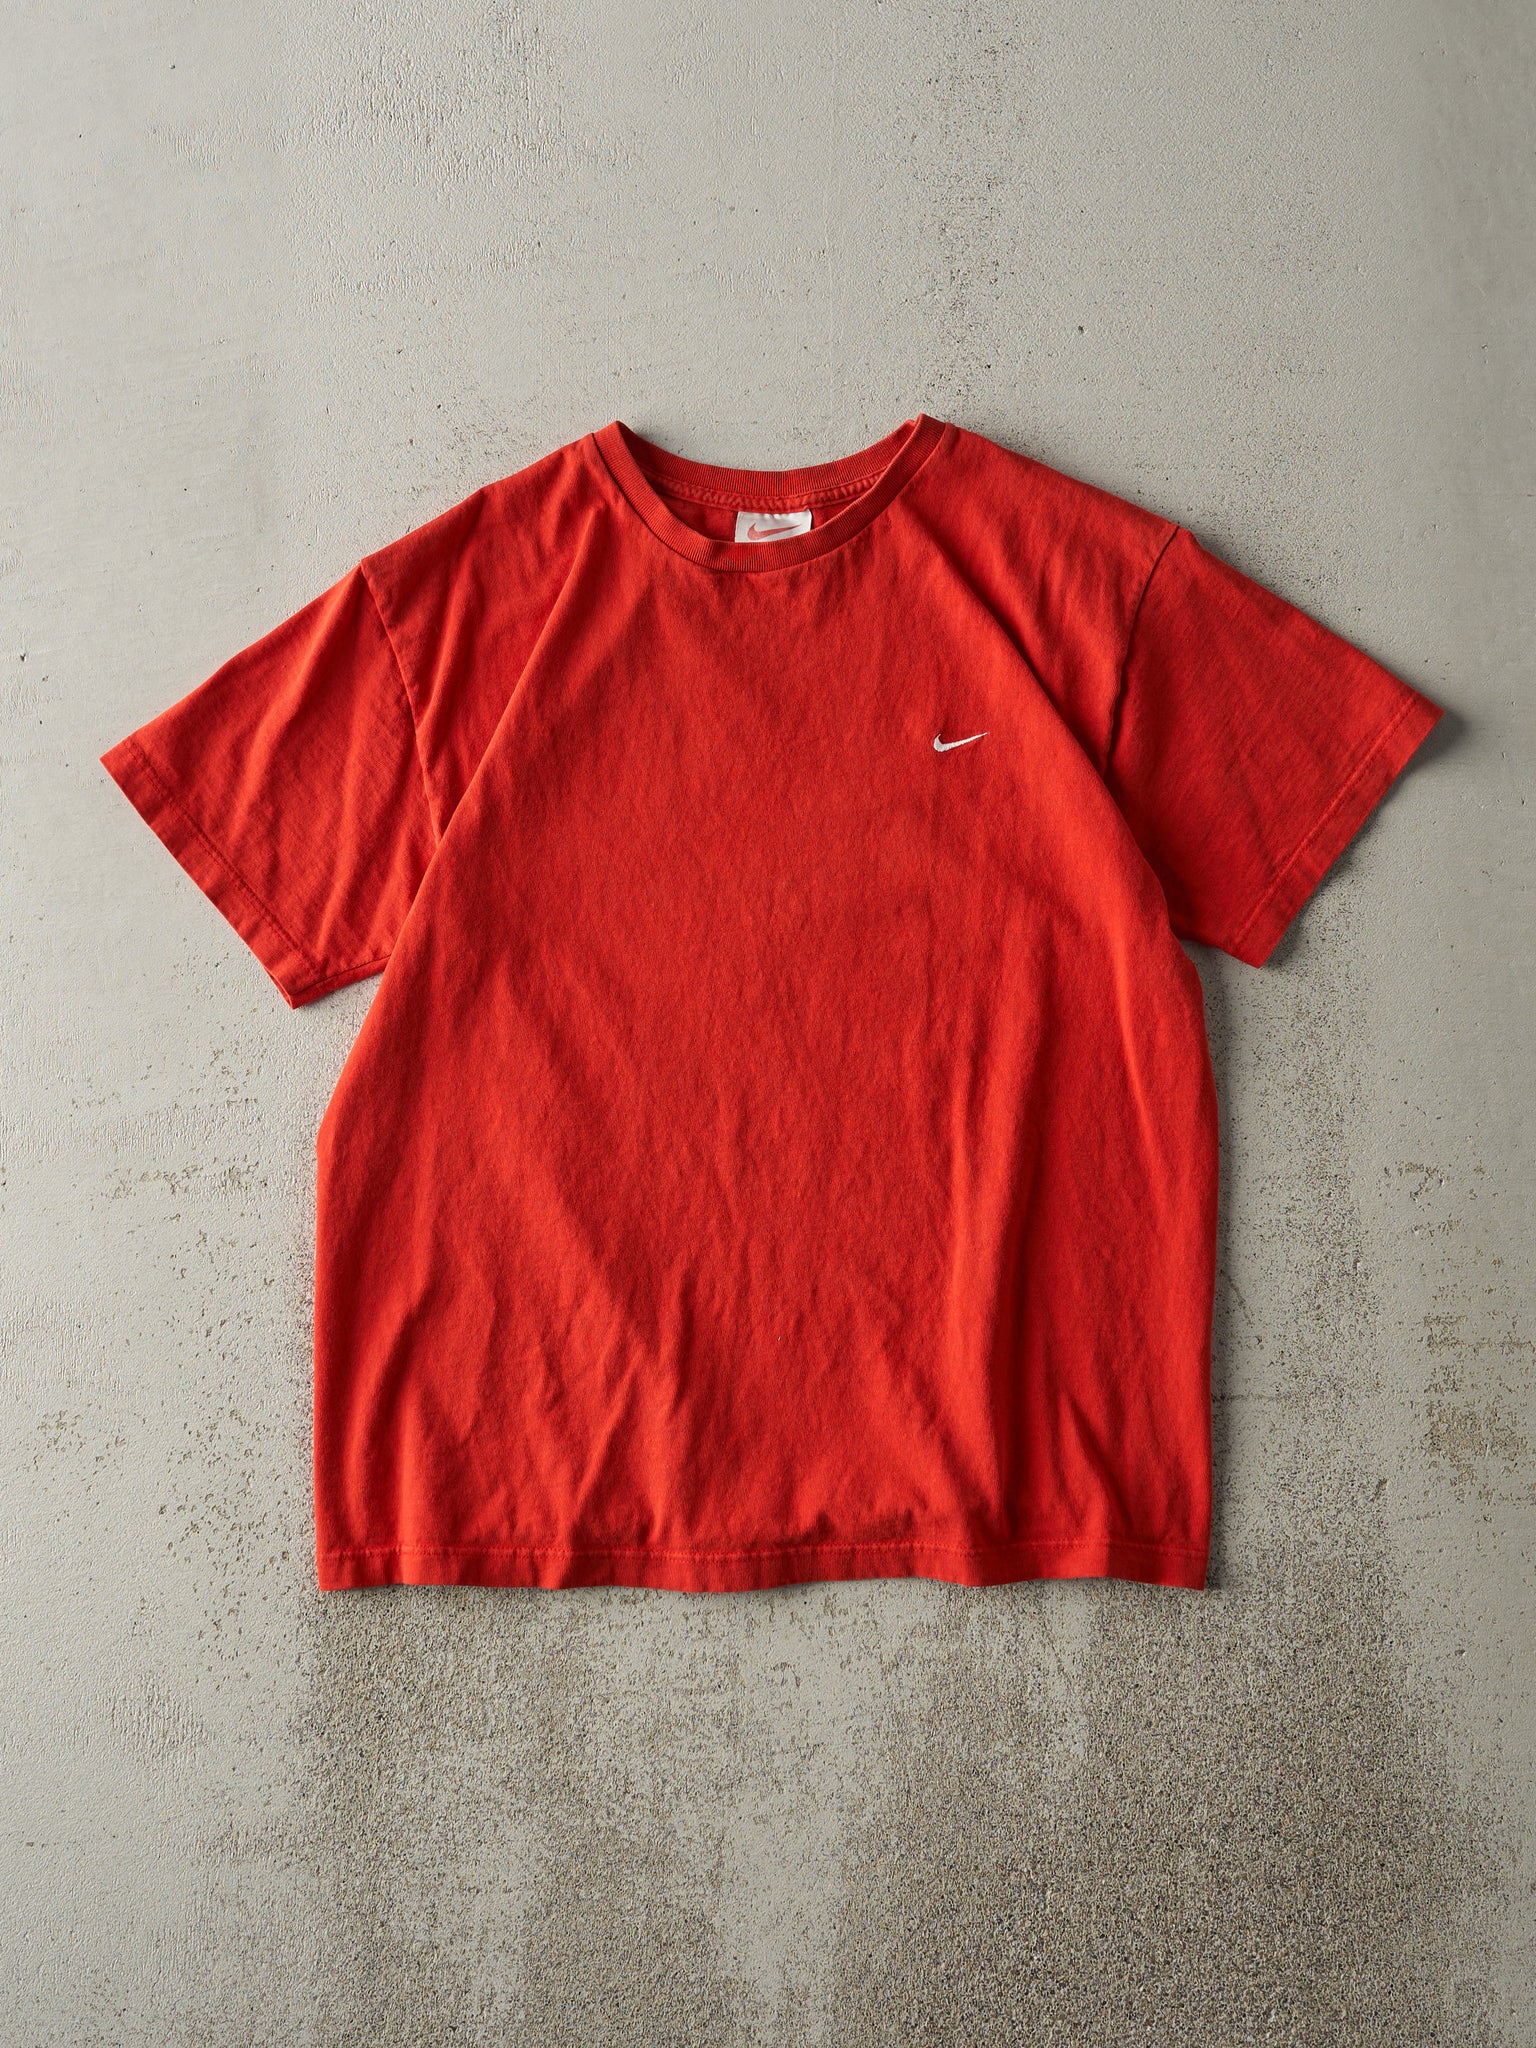 Vintage 90s Red Embroidered Nike Swoosh Tee (S)